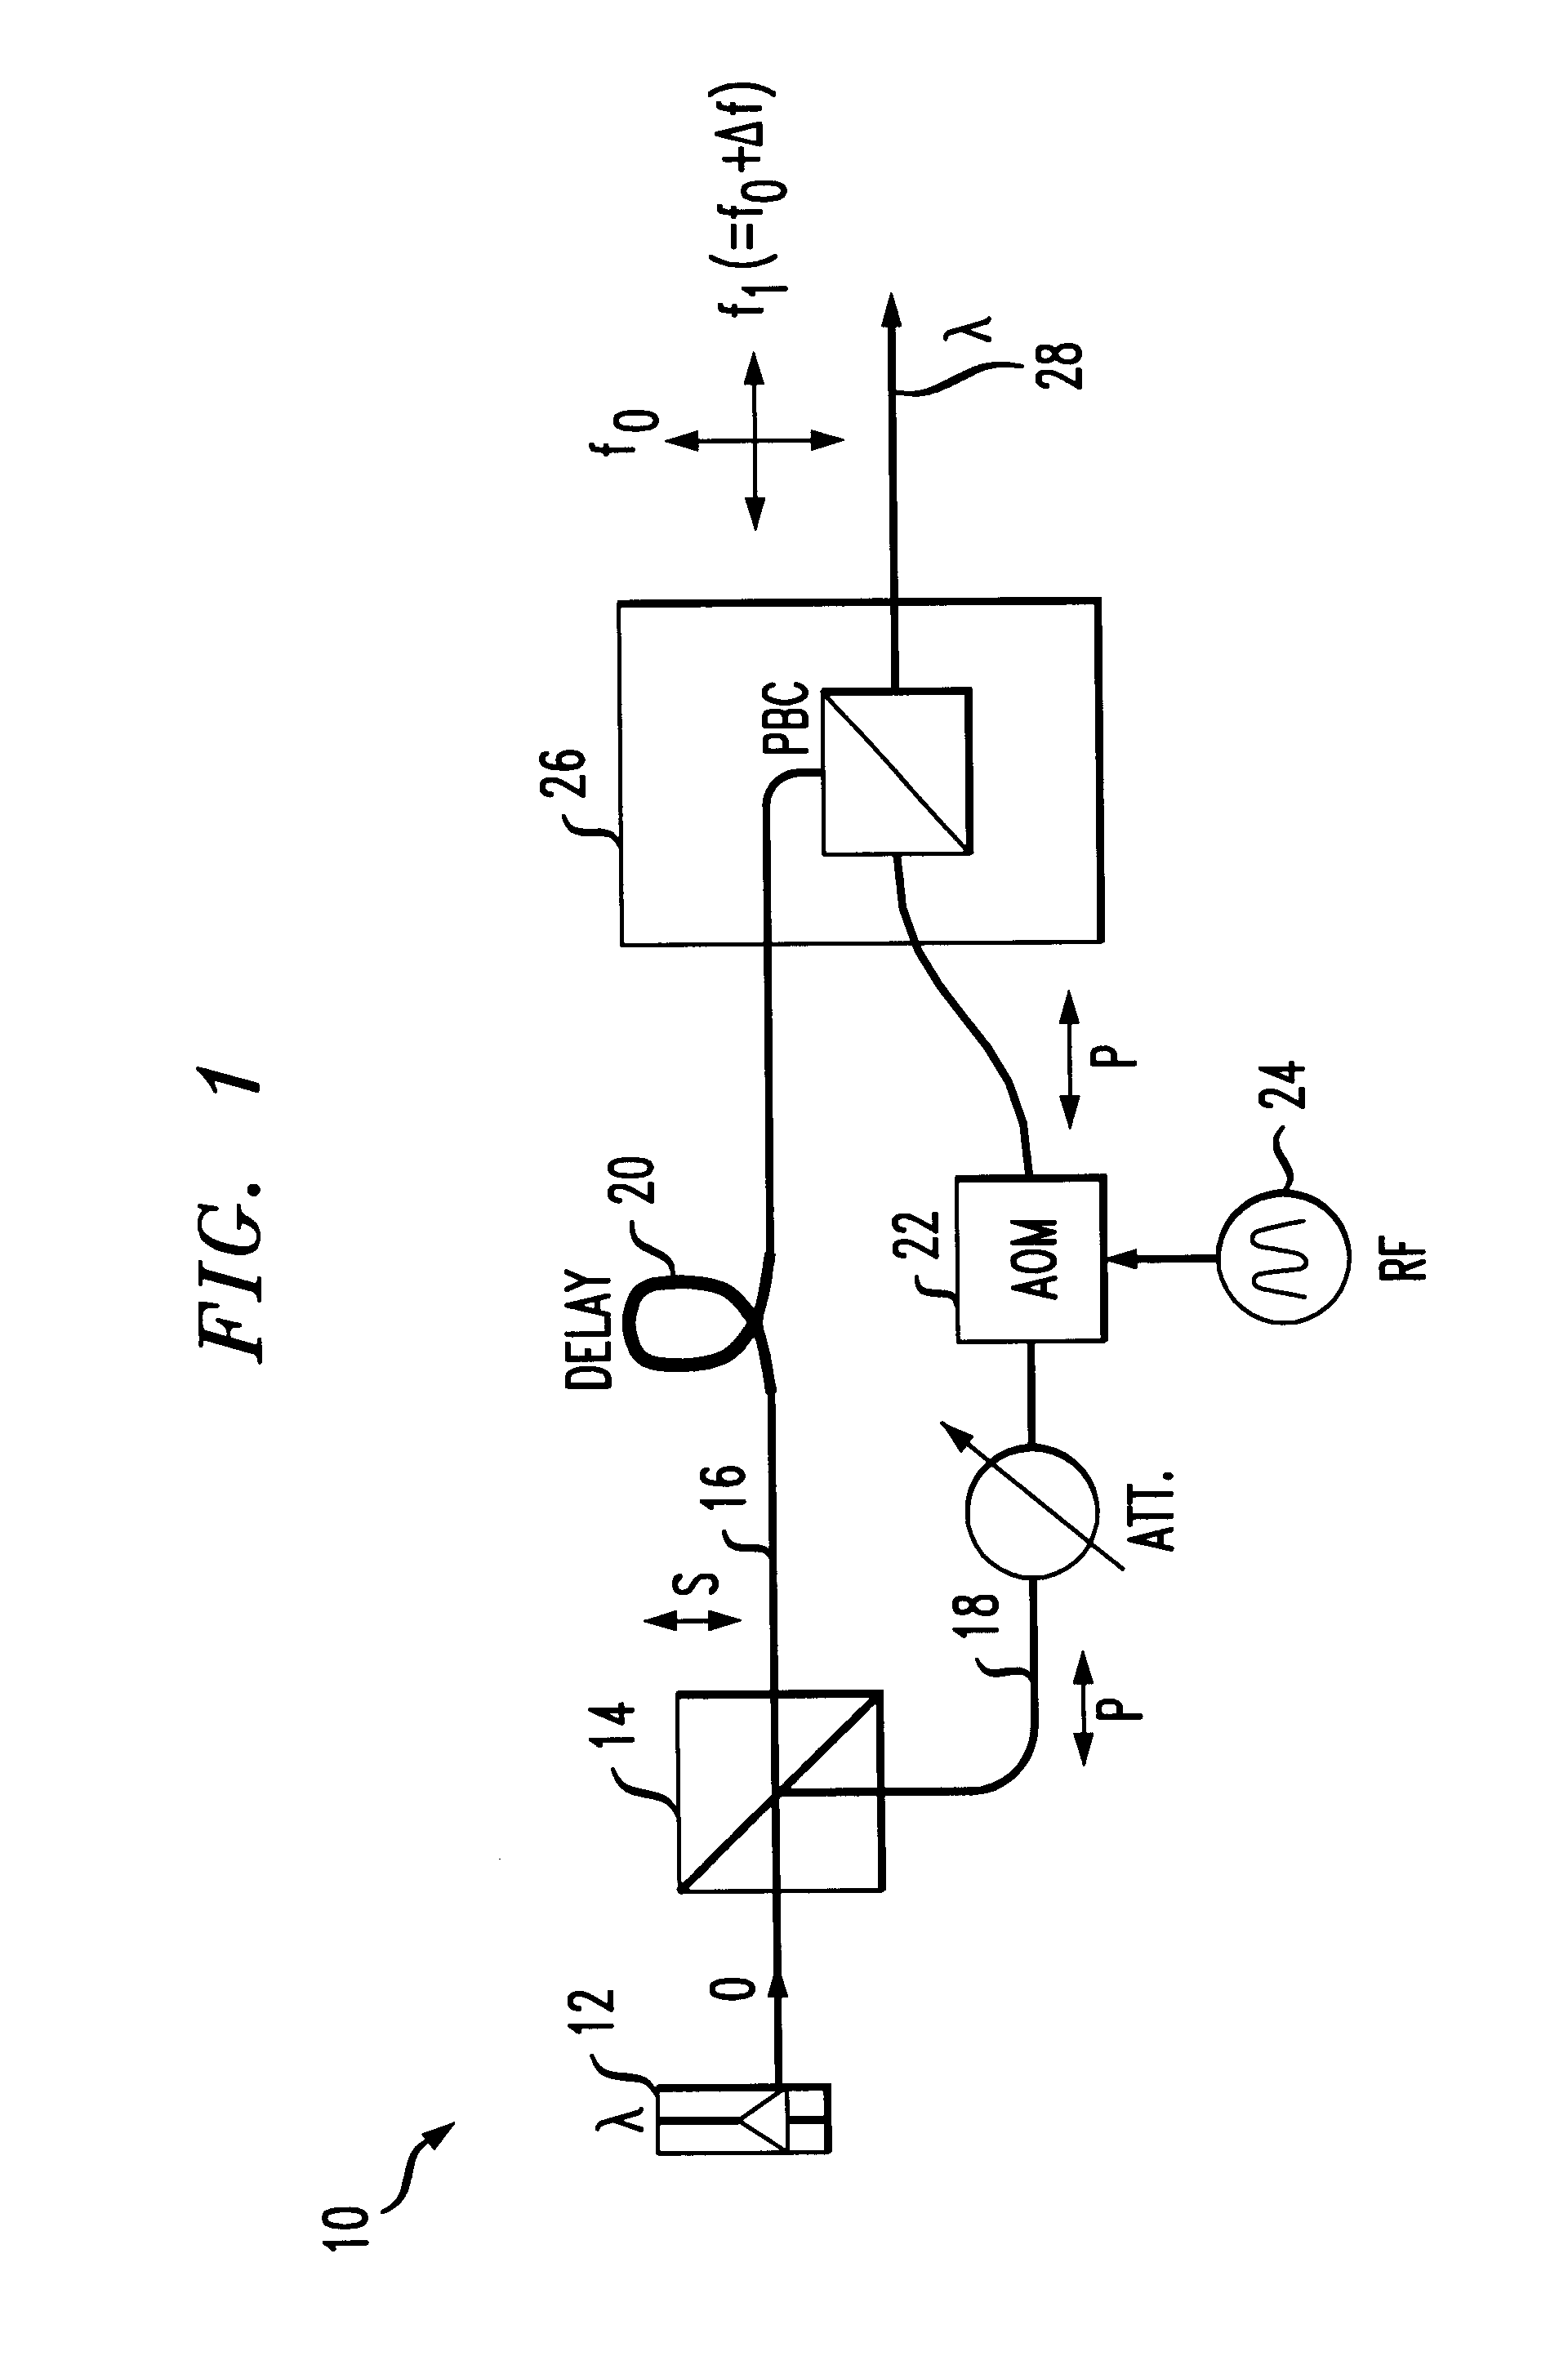 Optical fiber transmission system with polarization multiplexing to reduce stimulated brillouin scattering